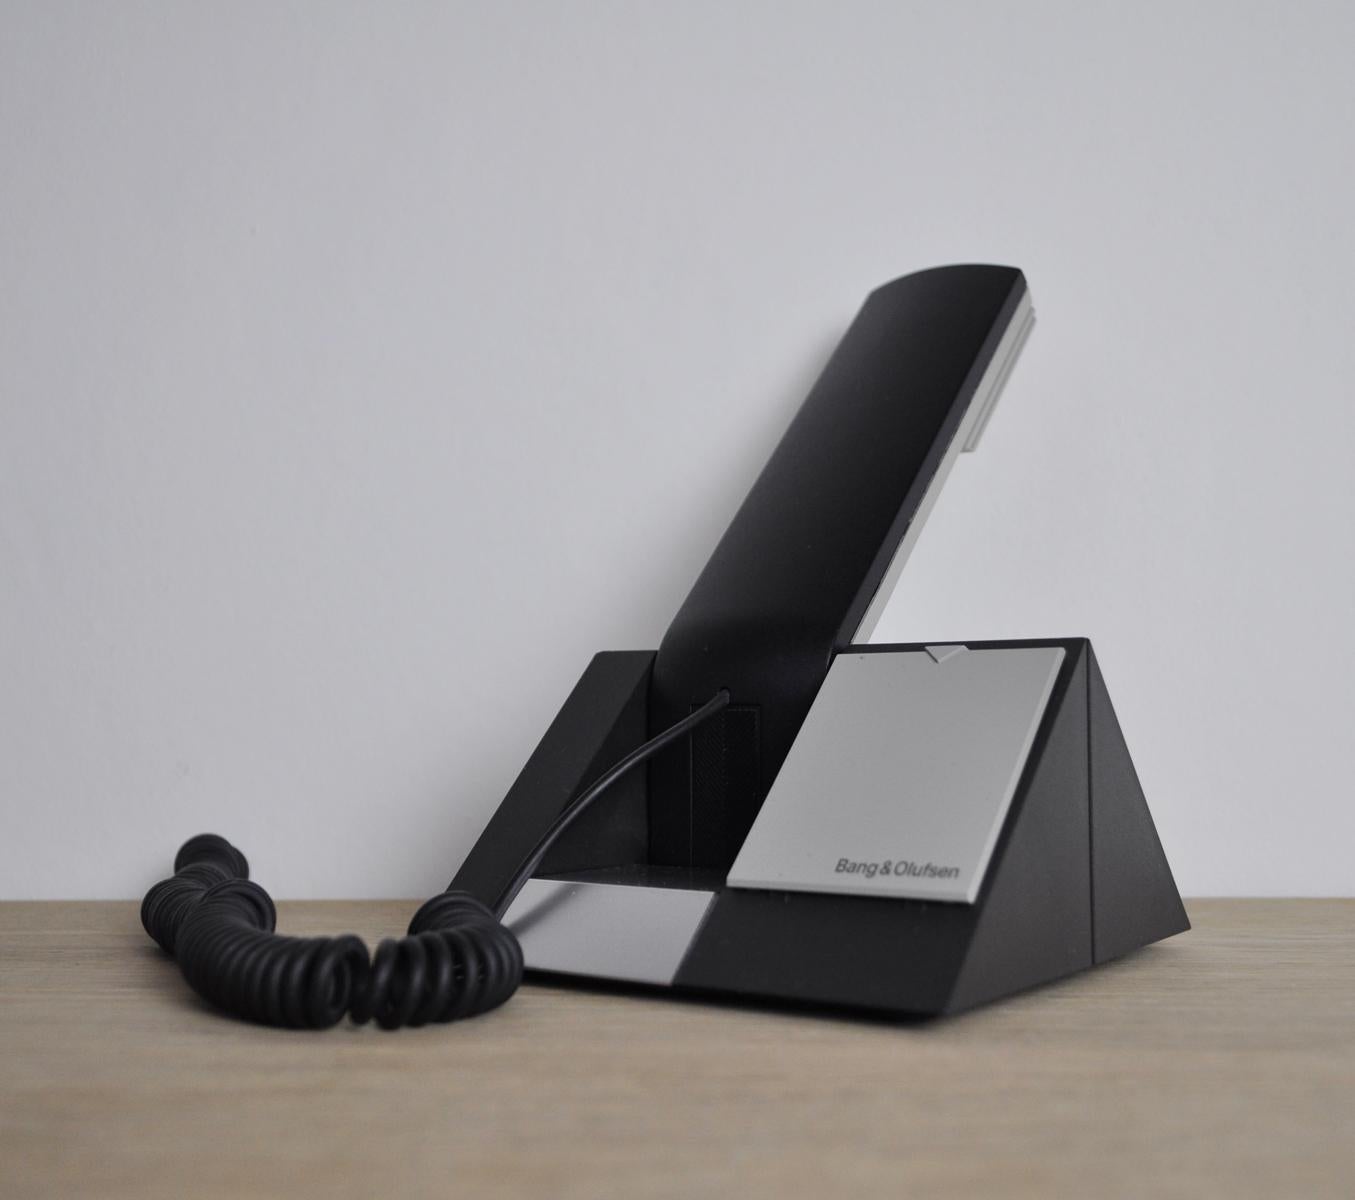 Beocom 1401 Telephone from 1990s by Bang & Olusfen.

BeoCom 1401 with table holder is an easy-to-use telephone with simple functionality. Everything is integrated in the handset.
BeoCom 1400 and BeoCom 1500 were the first in the 'new' series of